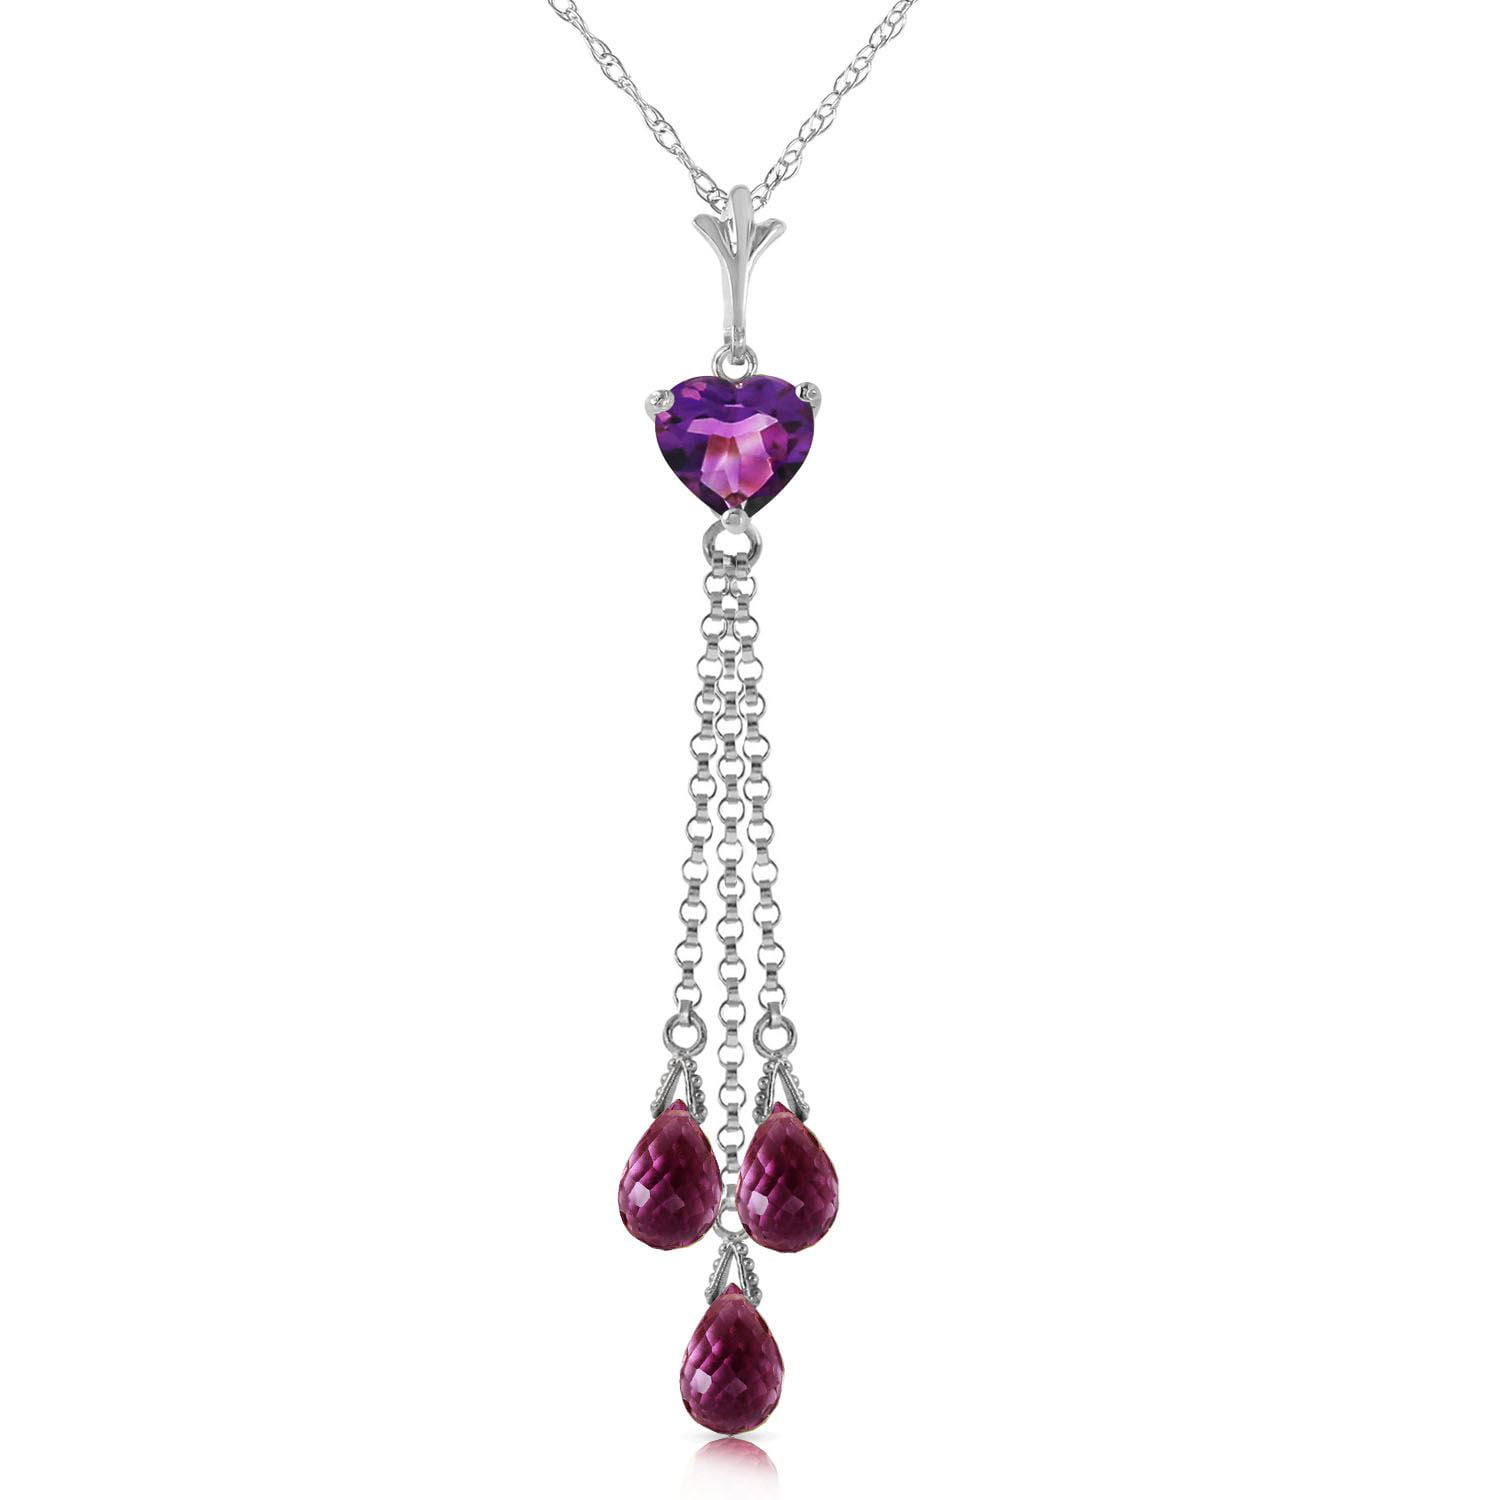 ALARRI 14K Solid Rose Gold Necklace w/ Natural Checkerboard Cut Purple Amethyst with 18 Inch Chain Length